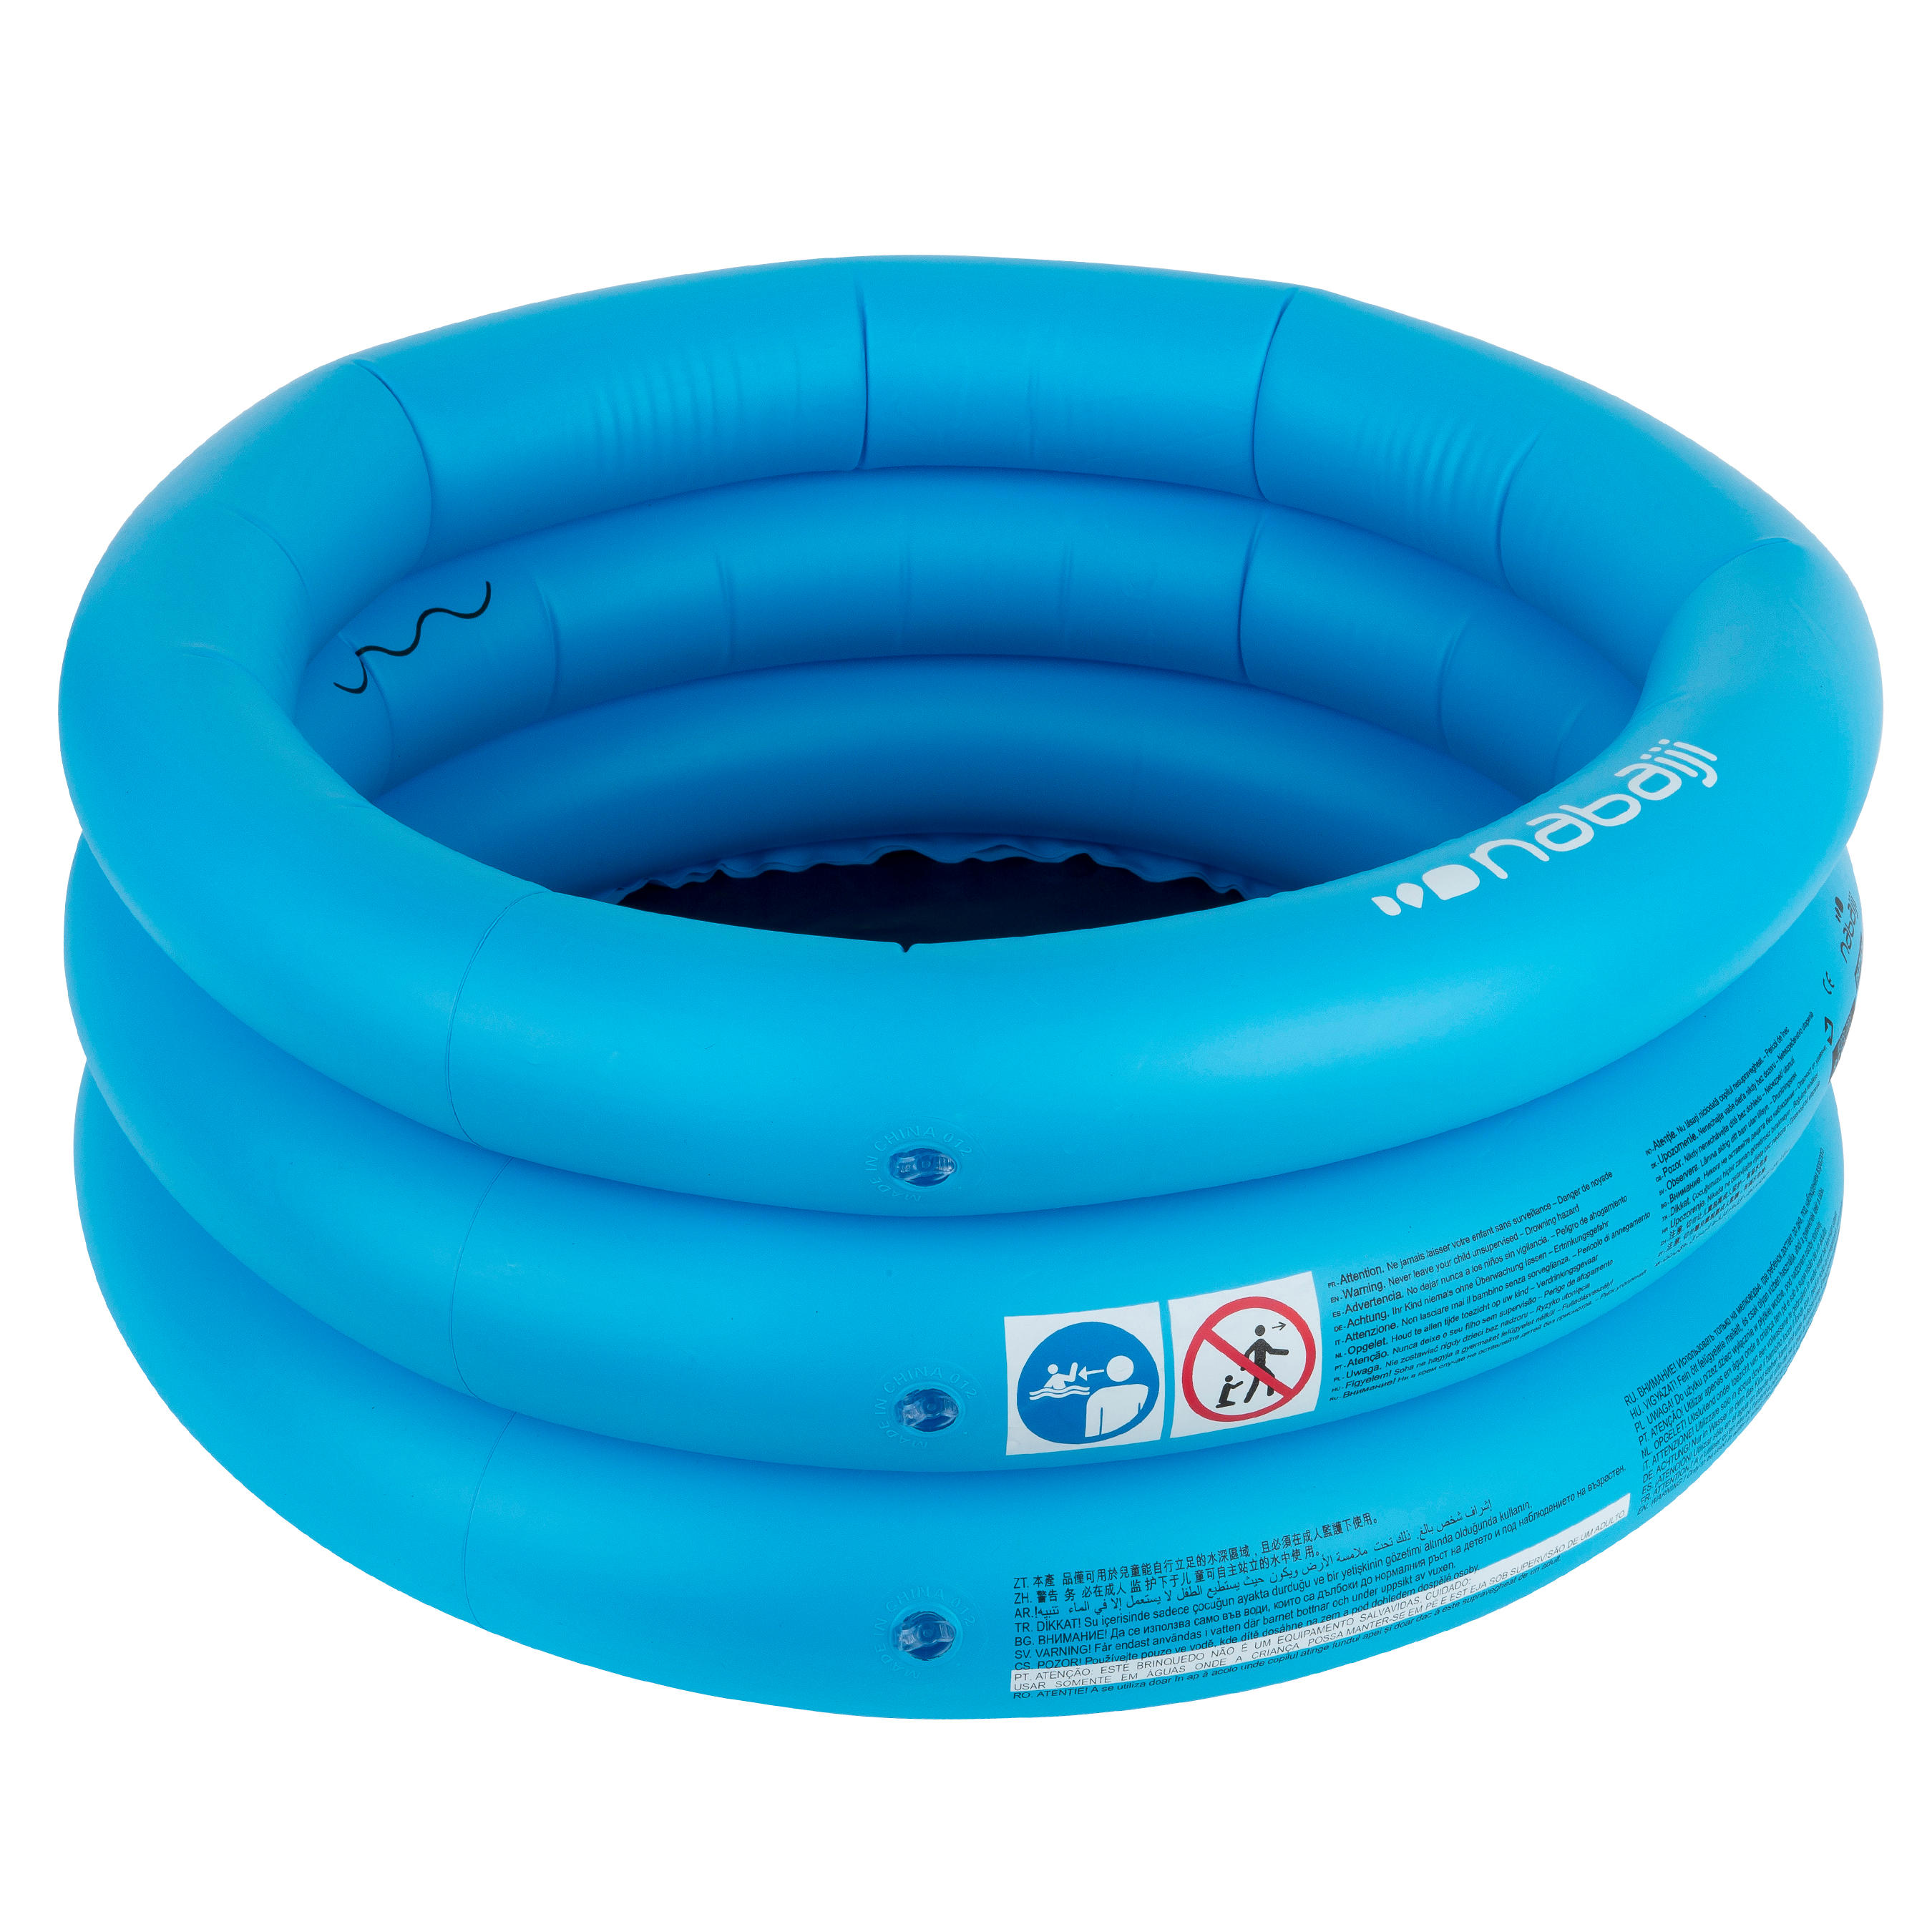 inflatable pool round